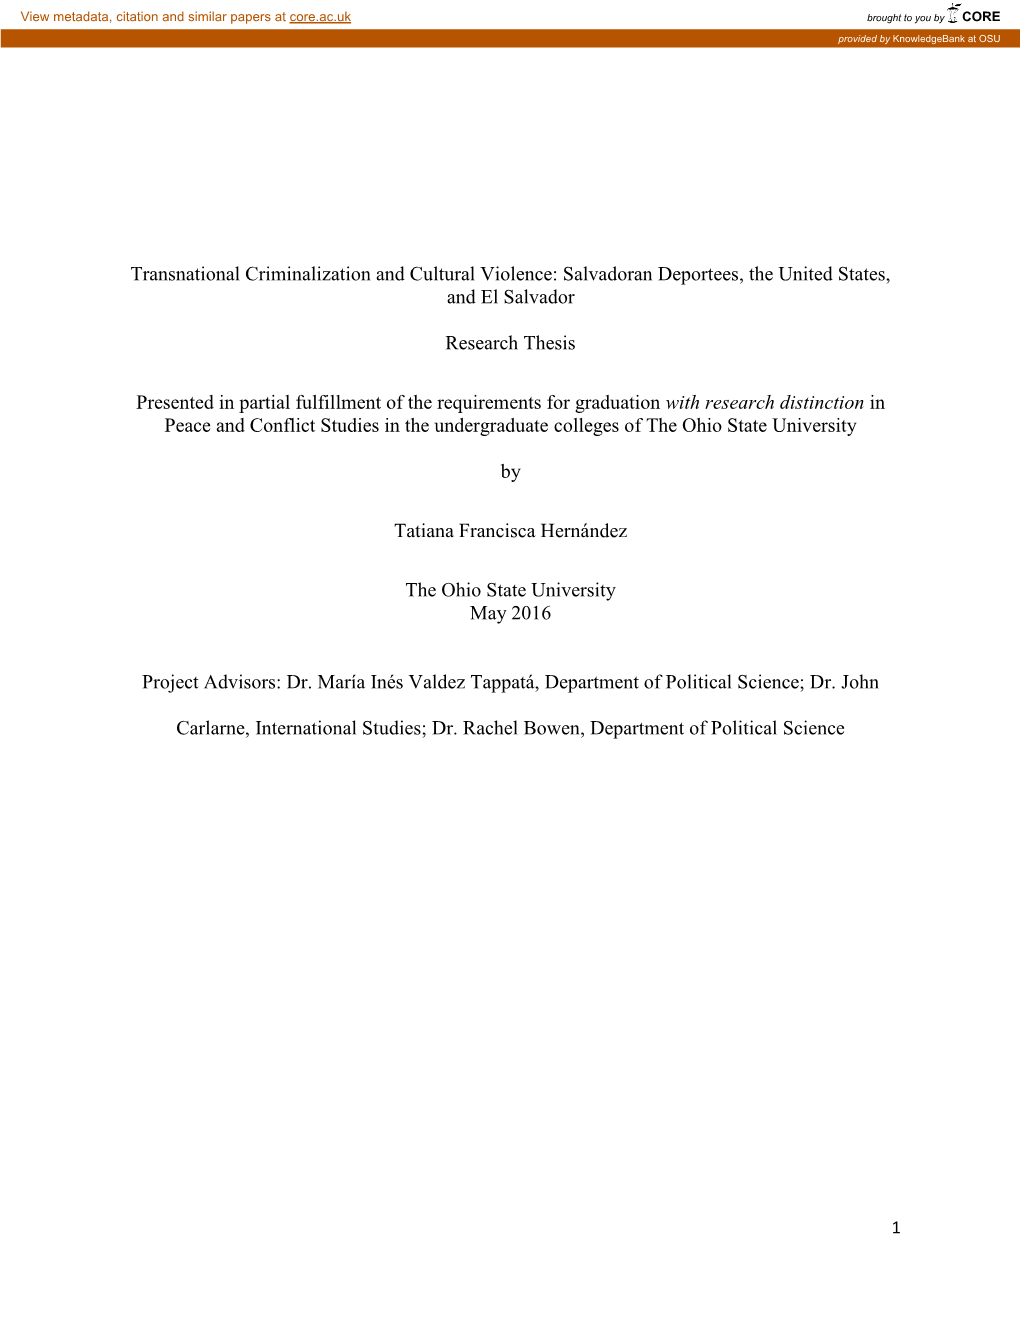 Transnational Criminalization and Cultural Violence: Salvadoran Deportees, the United States, and El Salvador Research Thesis P